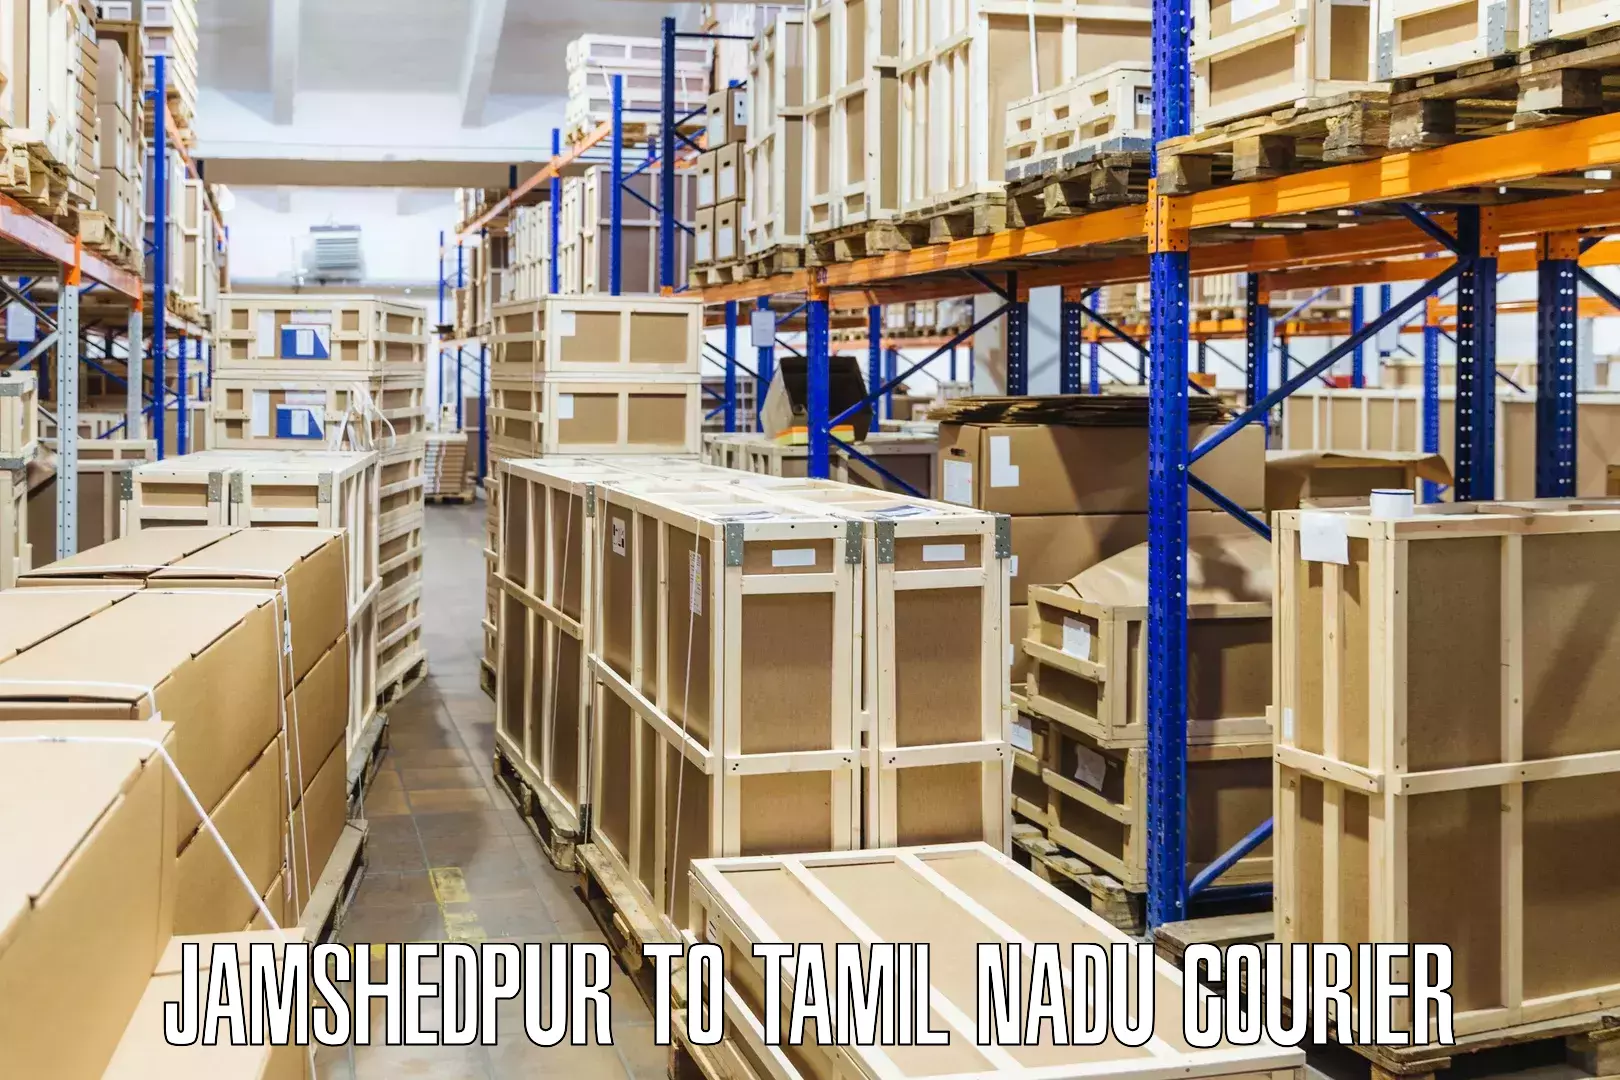 Express delivery capabilities Jamshedpur to Vellore Institute of Technology